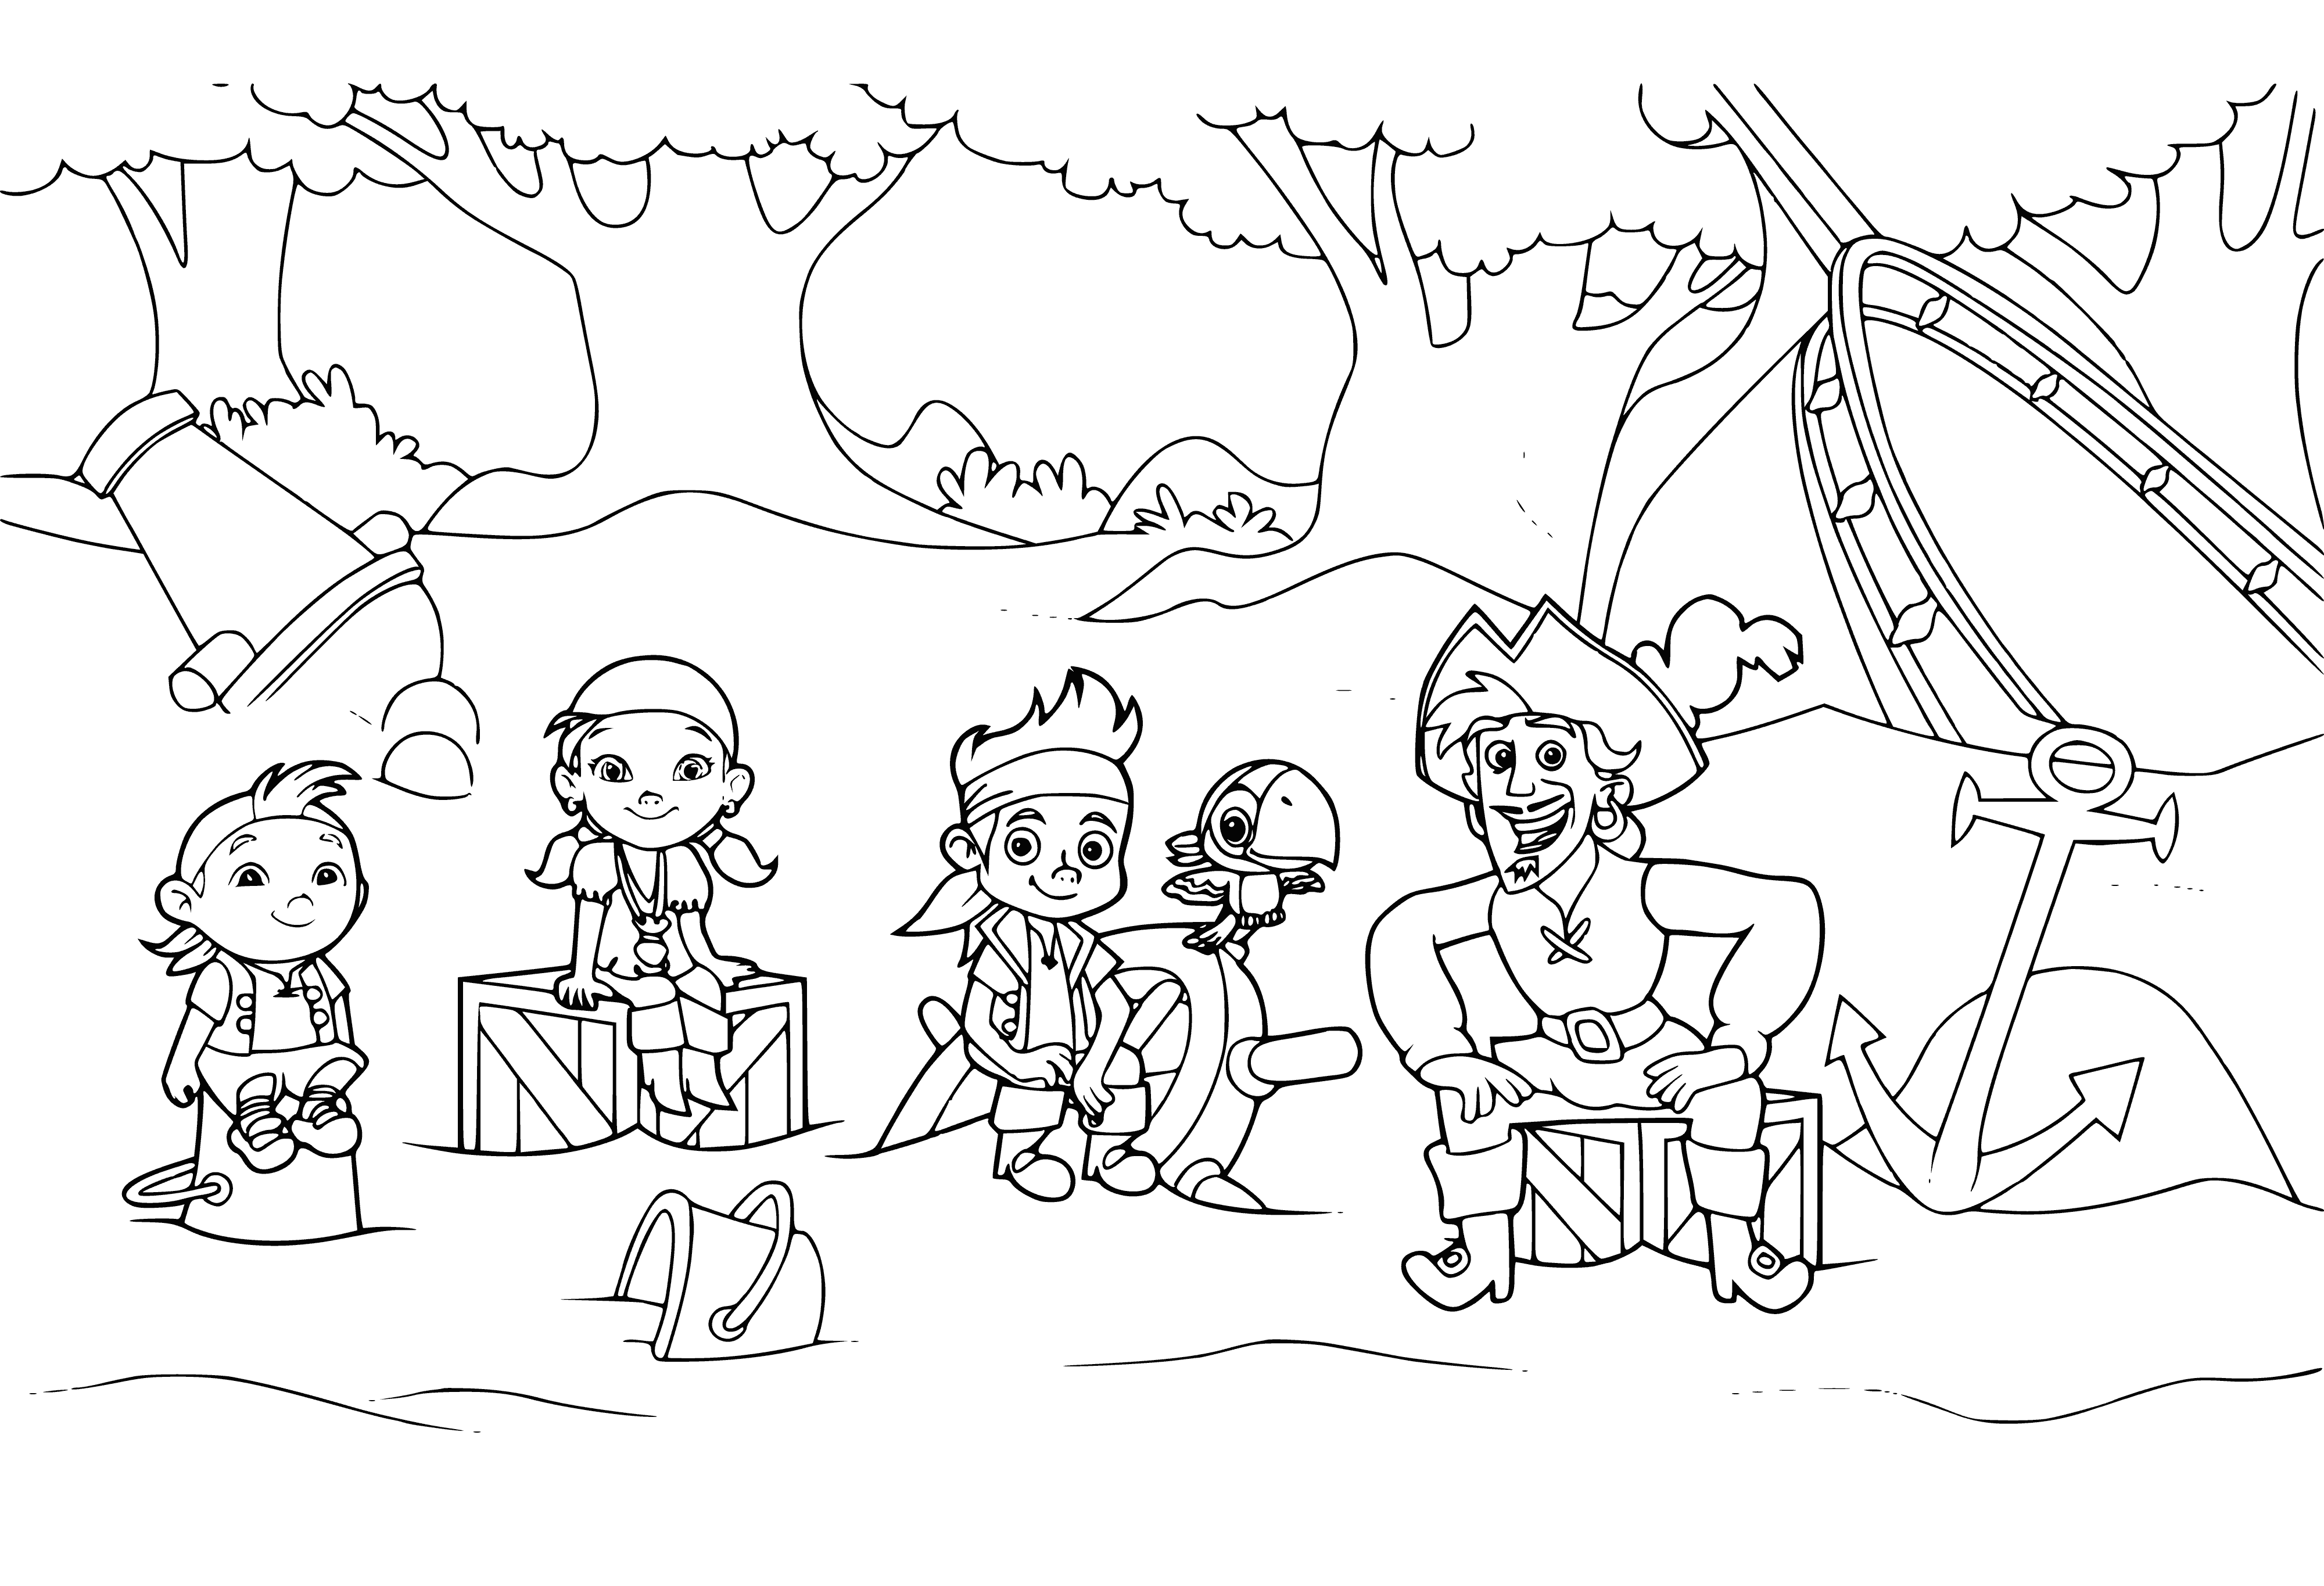 The pirate tells a story coloring page